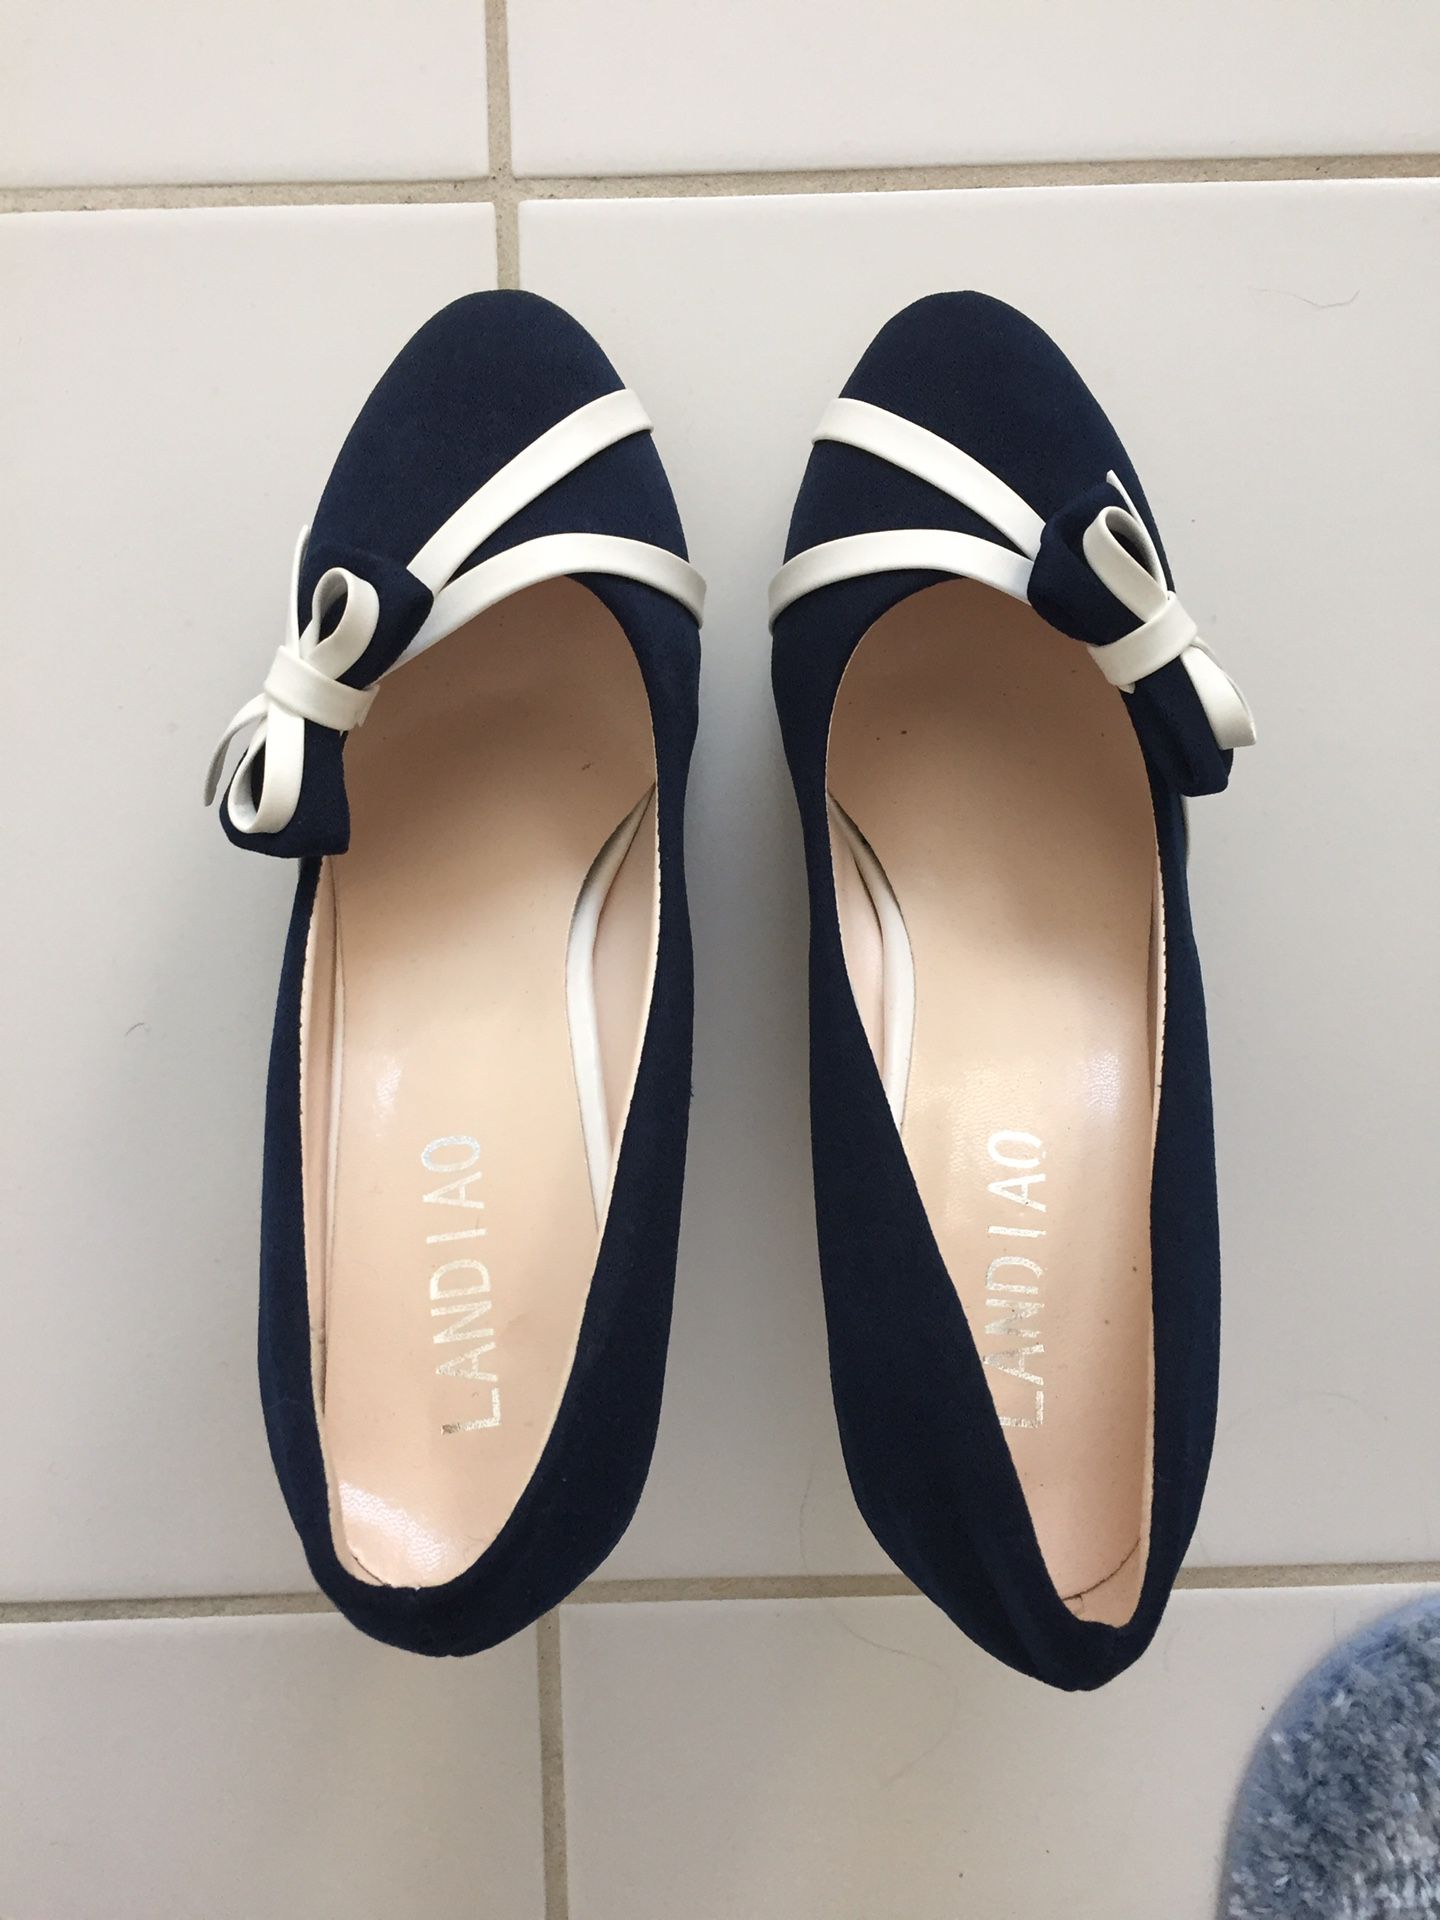 Anthropologie Landiao Navy Blue And White Bow Tie Heels